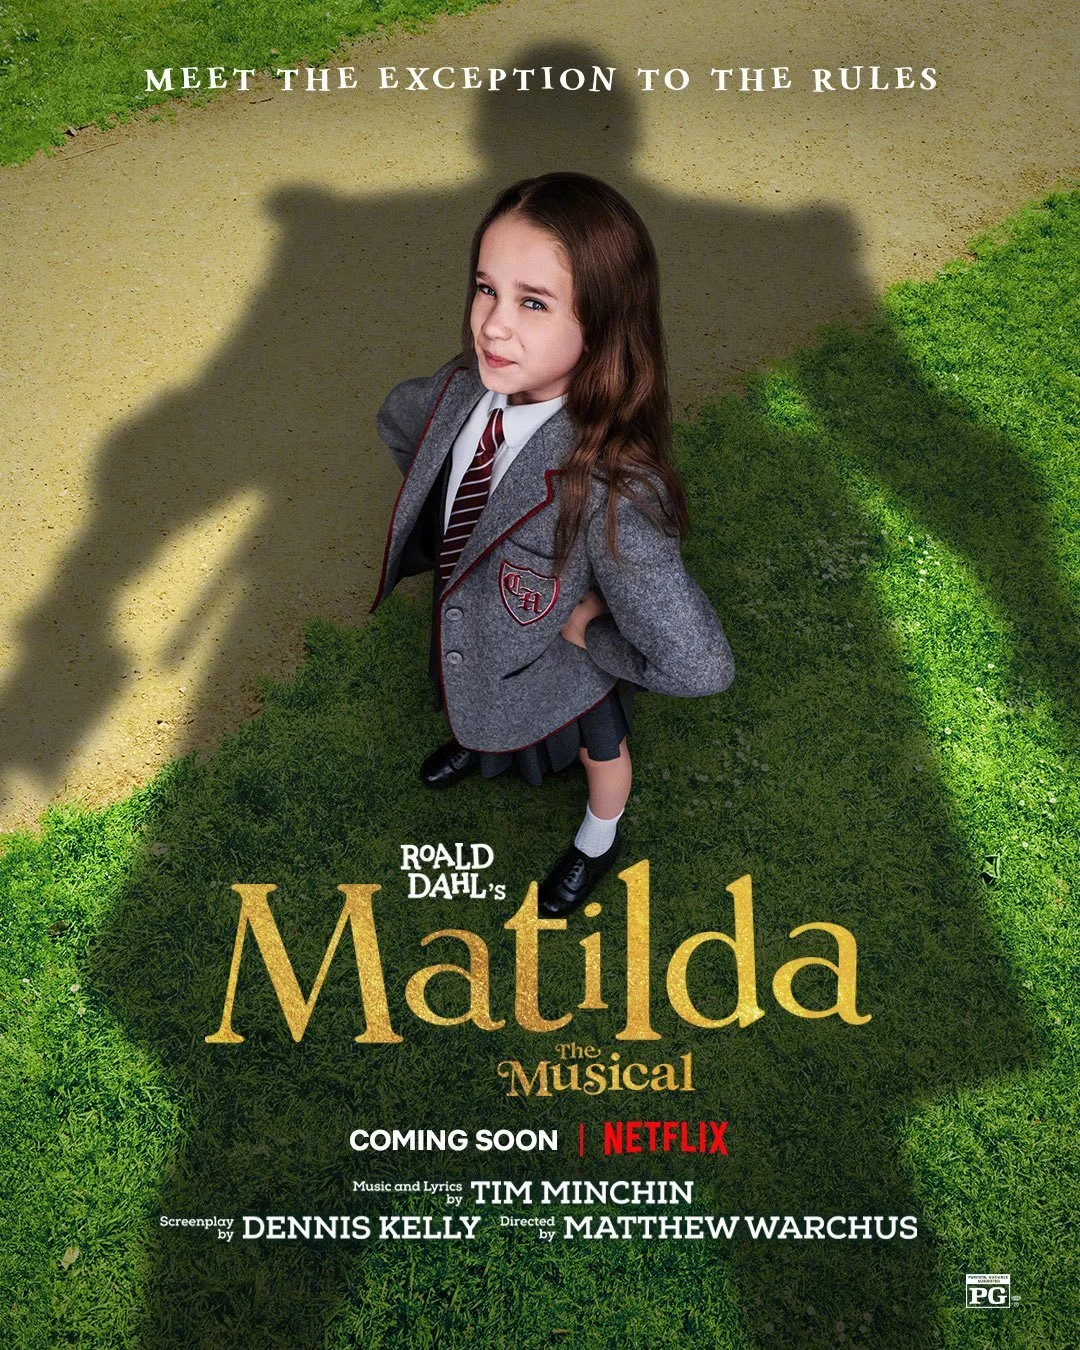 Comedy Musical film "Roald Dahl's Matilda the Musical" released Official Teaser and poster, it will be released on December 2